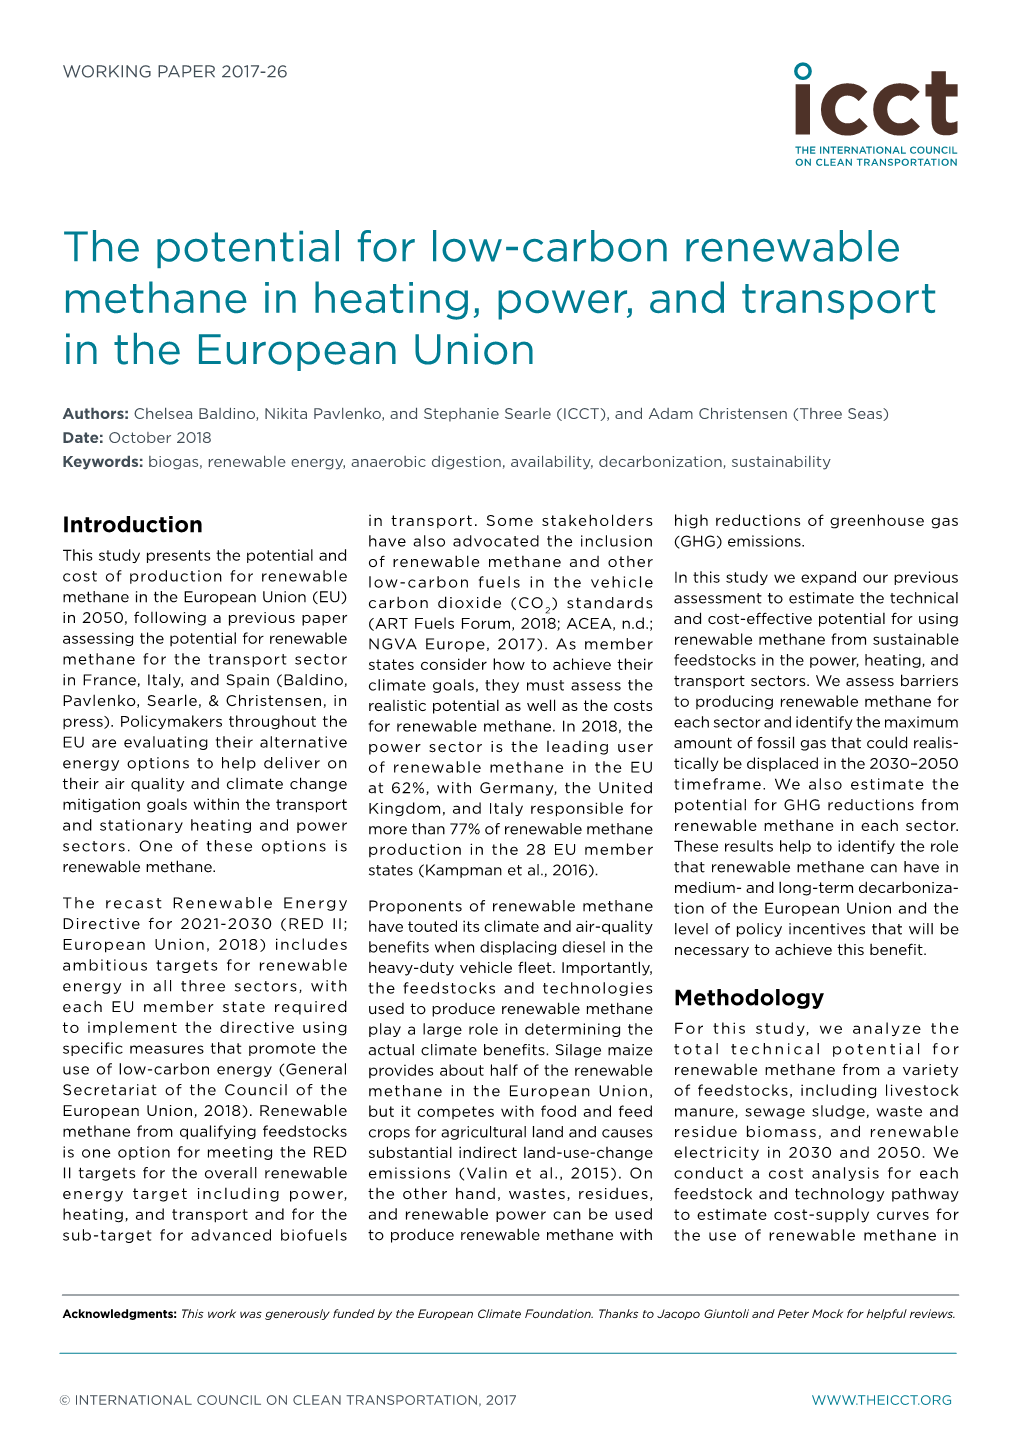 The Potential for Low-Carbon Renewable Methane in Heating, Power, and Transport in the European Union